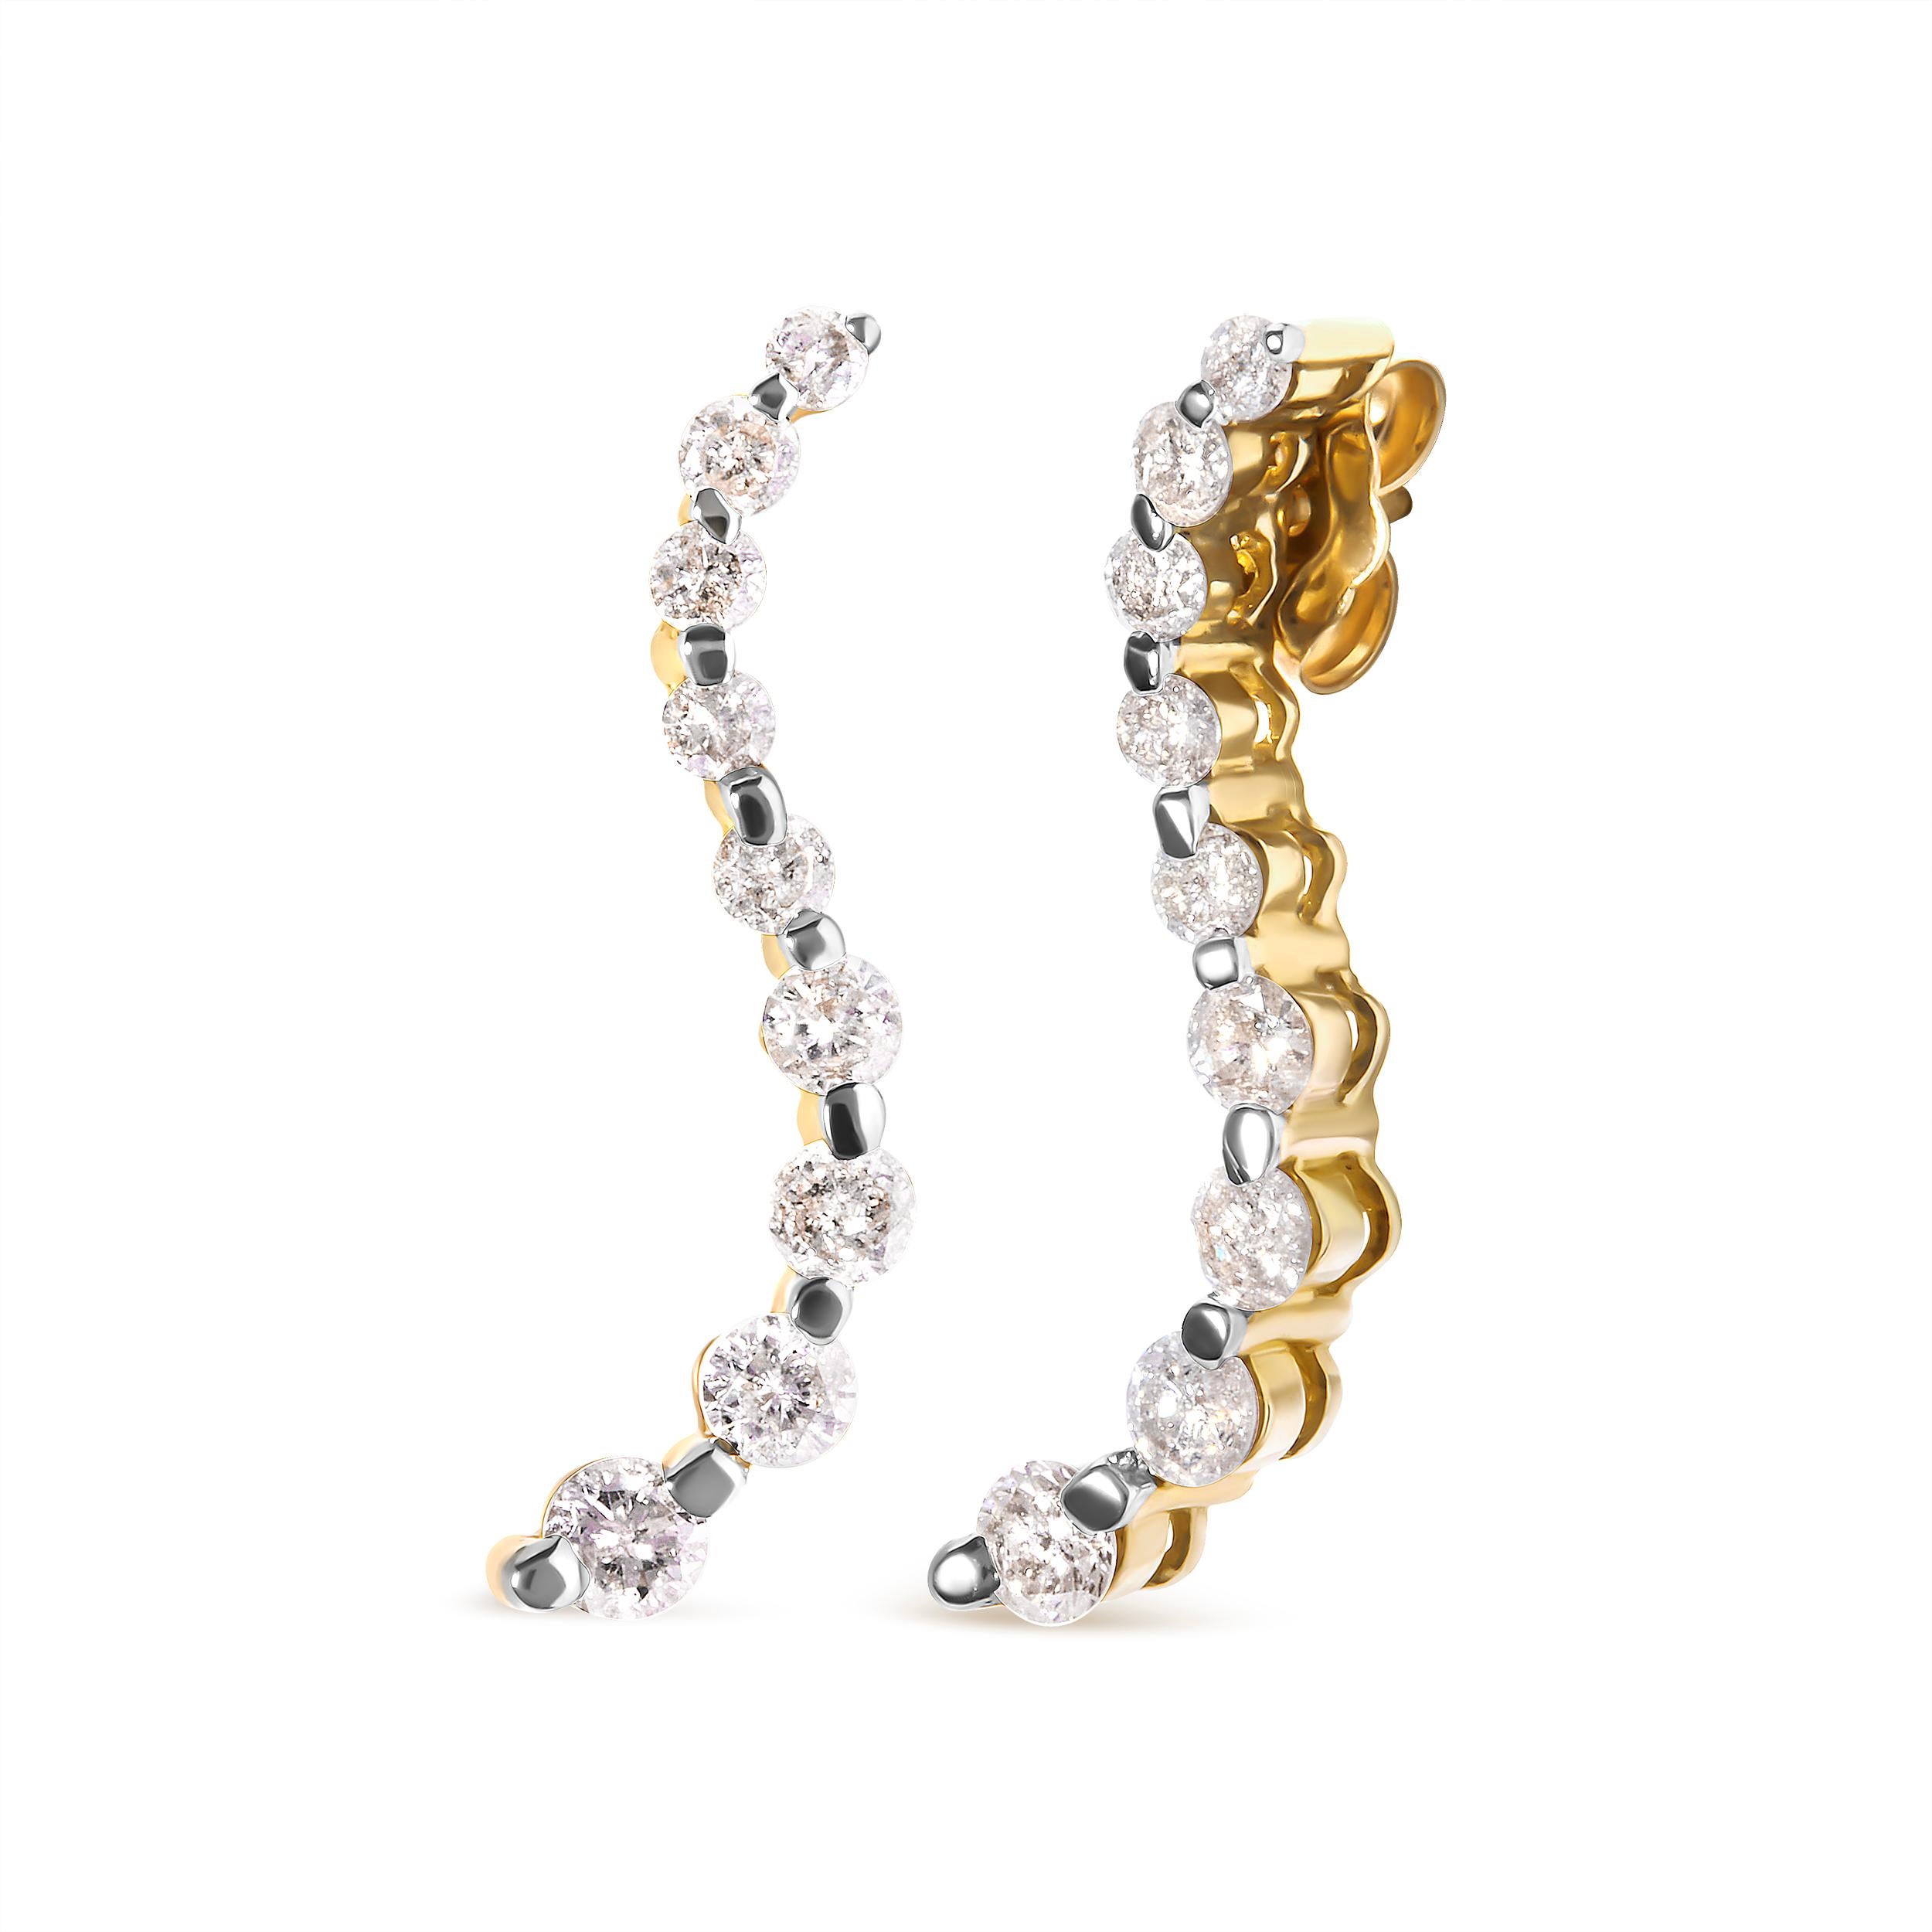 Turn heads with this captivating pair of diamond journey earrings. The shapely s-wave design draws the eye down the length, featuring nine sparkling round diamonds in a prong setting which grow increasingly larger from top to bottom. These stud